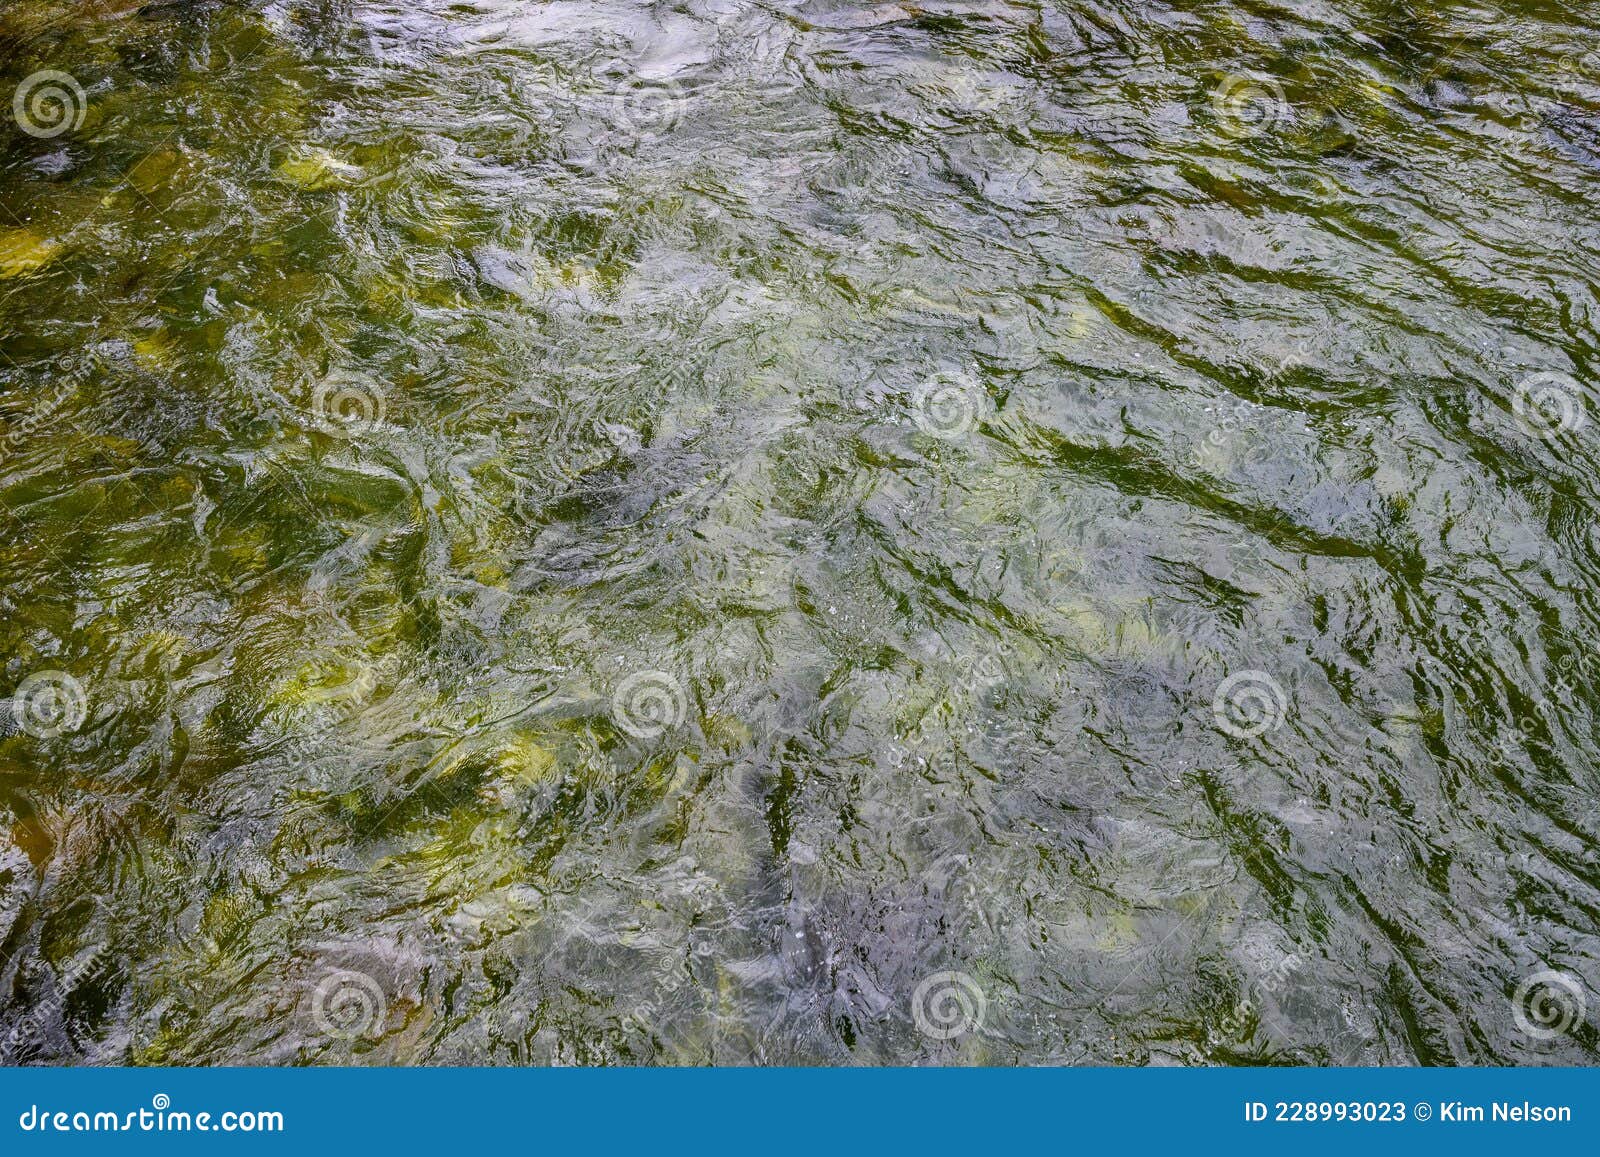 green flowing water of the gallatin river, as a nature background, big sky, montana